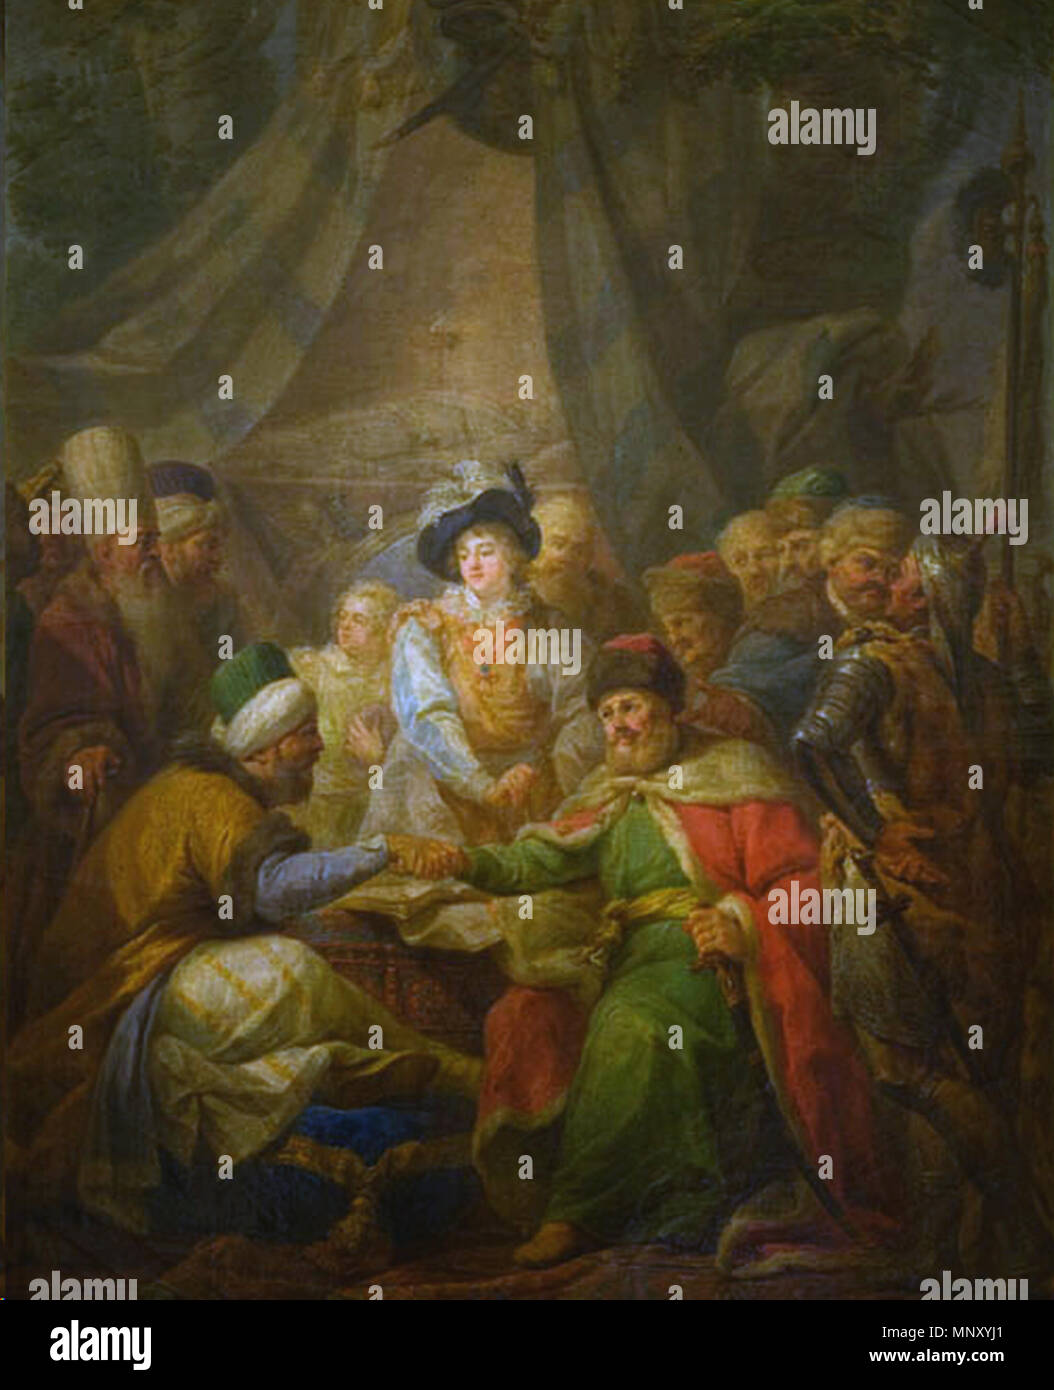 .  English: Treaty of Khotyn (1621) . 1796.    Marcello Bacciarelli  (1731–1818)     Alternative names Marceli Bacciarelli; Marcello bacciarelli  Description Italian-Polish painter, draughtsman and decorator Citizen of the Polish-Lithuanian Commonwealth (1768)  Date of birth/death 16 February 1731 5 January 1818  Location of birth/death Rome Warsaw  Work location Dresden (1753-1764), Warsaw (1756), Vienna (1764-1766), Warsaw (1766-1818)  Authority control  : Q380717 VIAF: 69862837 ISNI: 0000 0001 1029 0177 ULAN: 500013111 LCCN: nr91030832 GND: 124485790 WorldCat 1204 Treaty of Khotyn (1621) Stock Photo